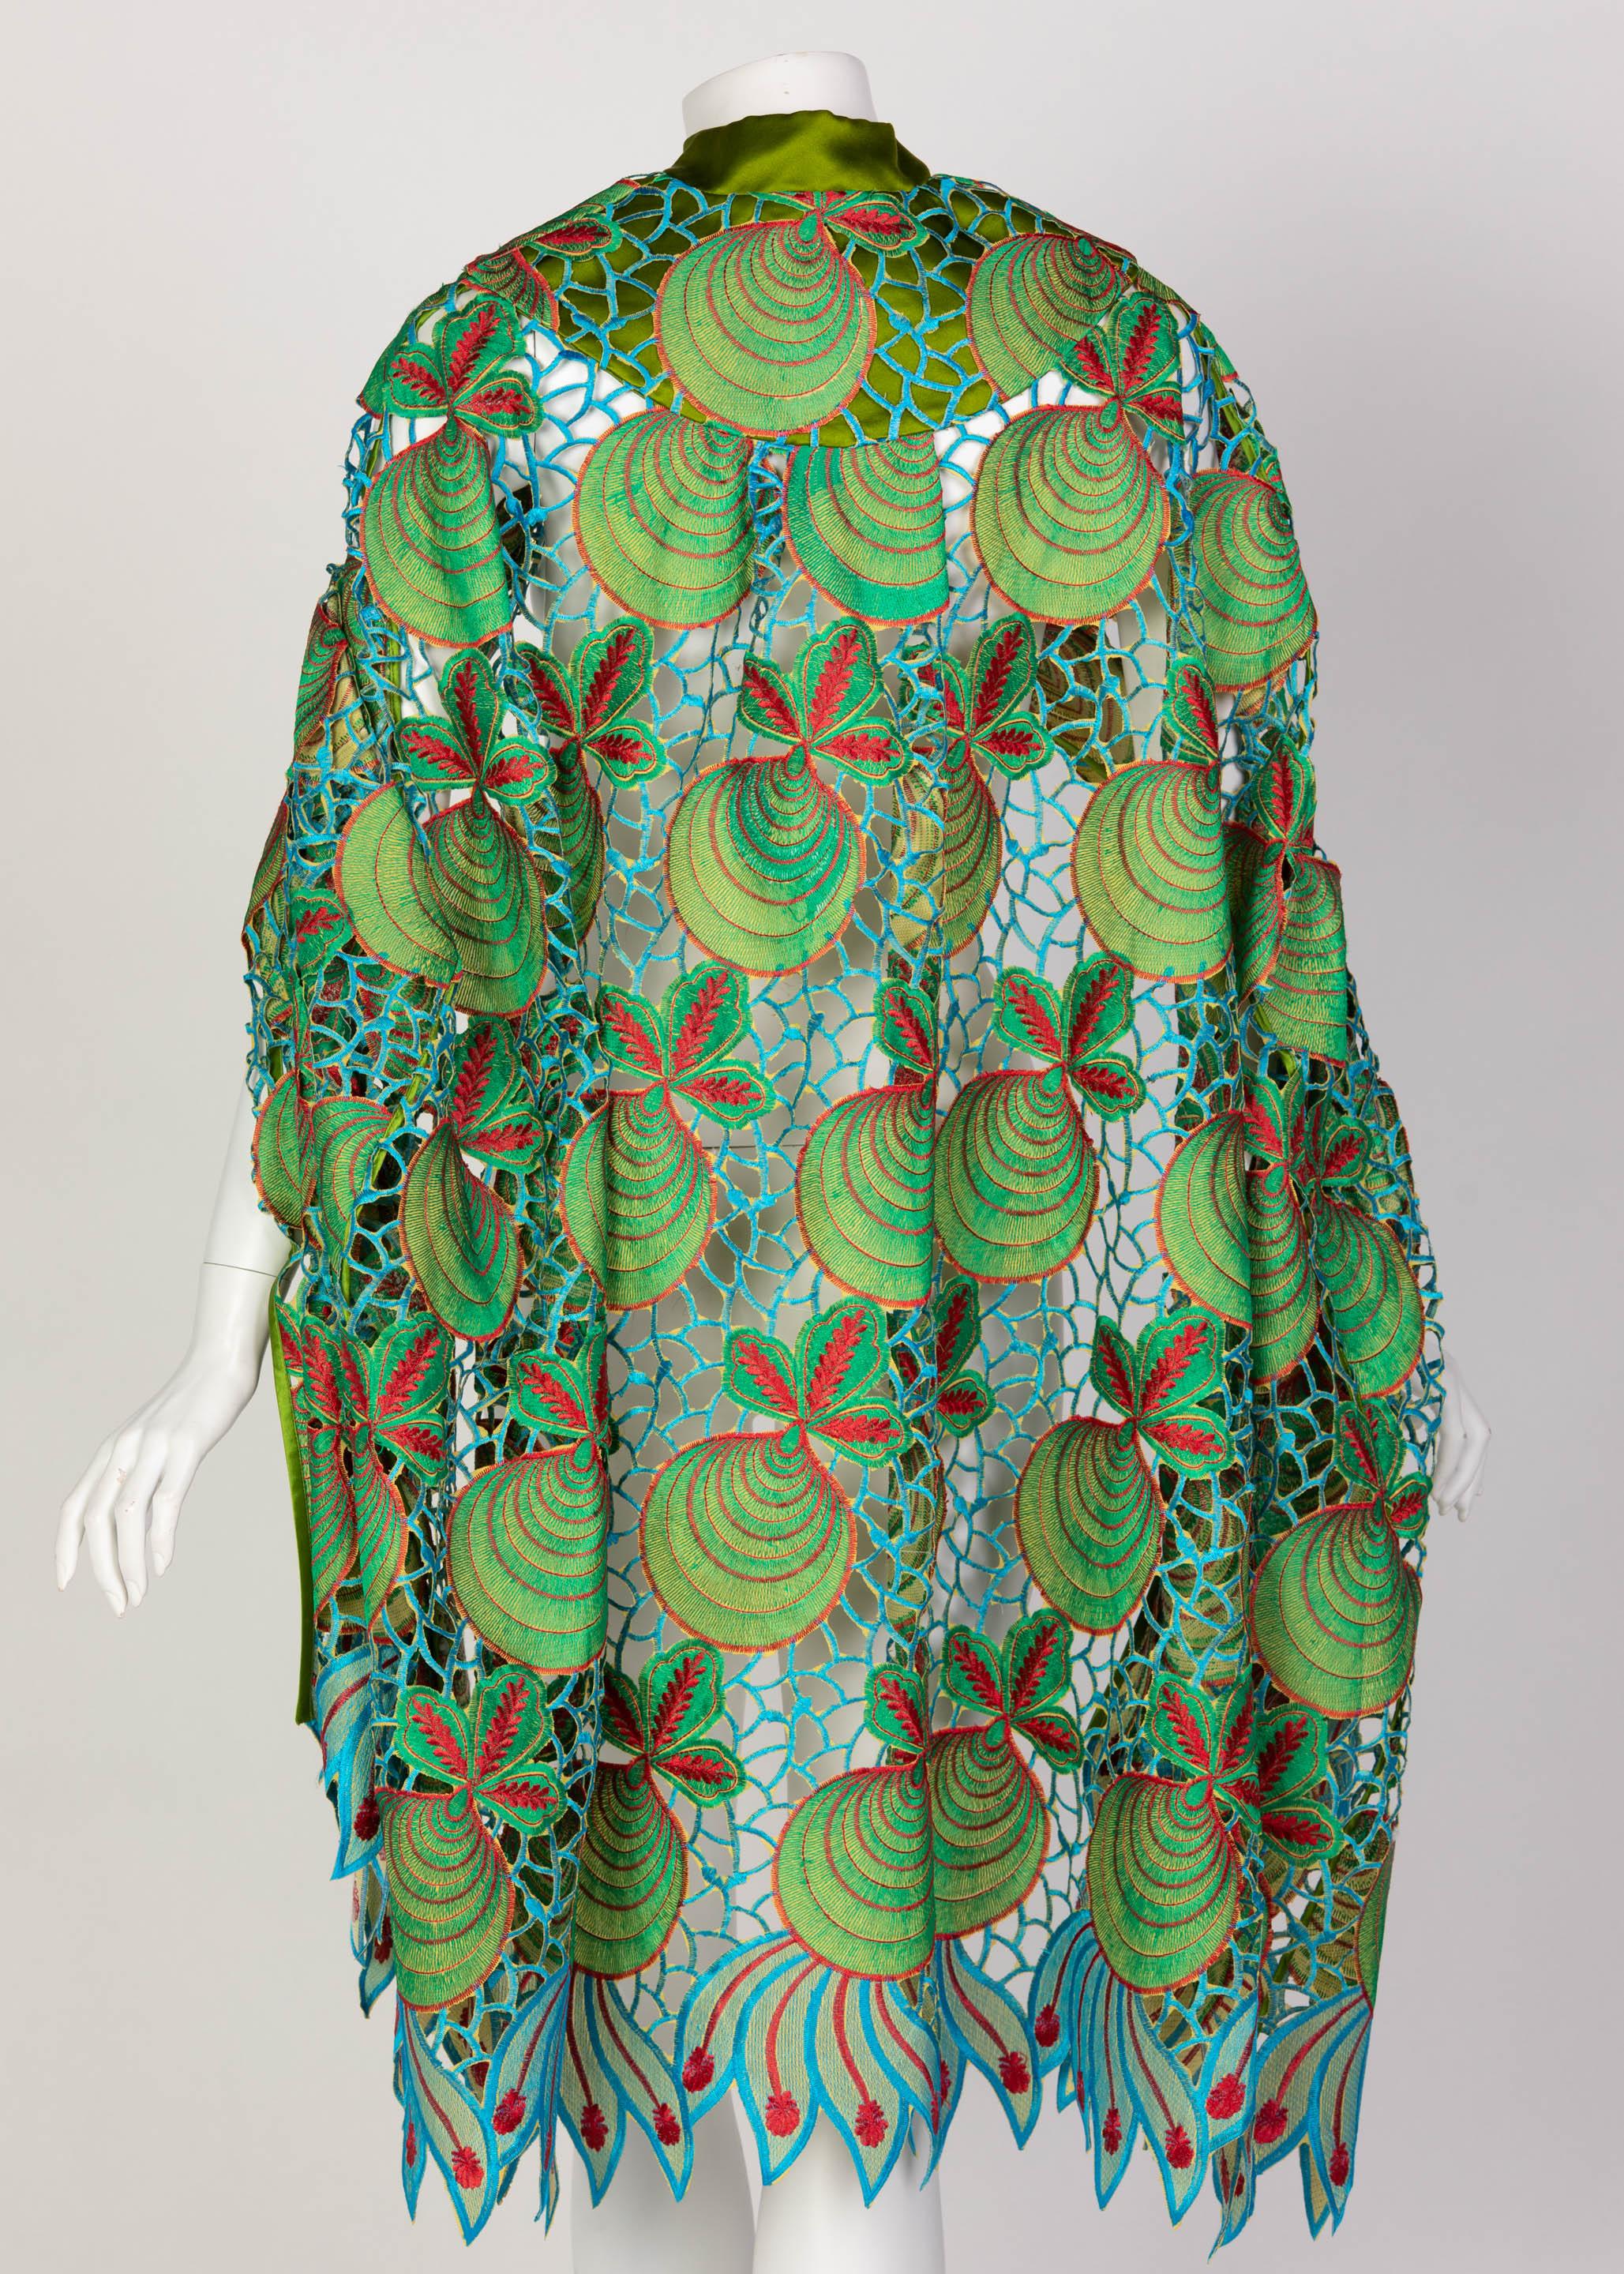 Duro Olowu Green Blue Red Cut Out Silk Lace Cape, 2012 In Excellent Condition For Sale In Boca Raton, FL